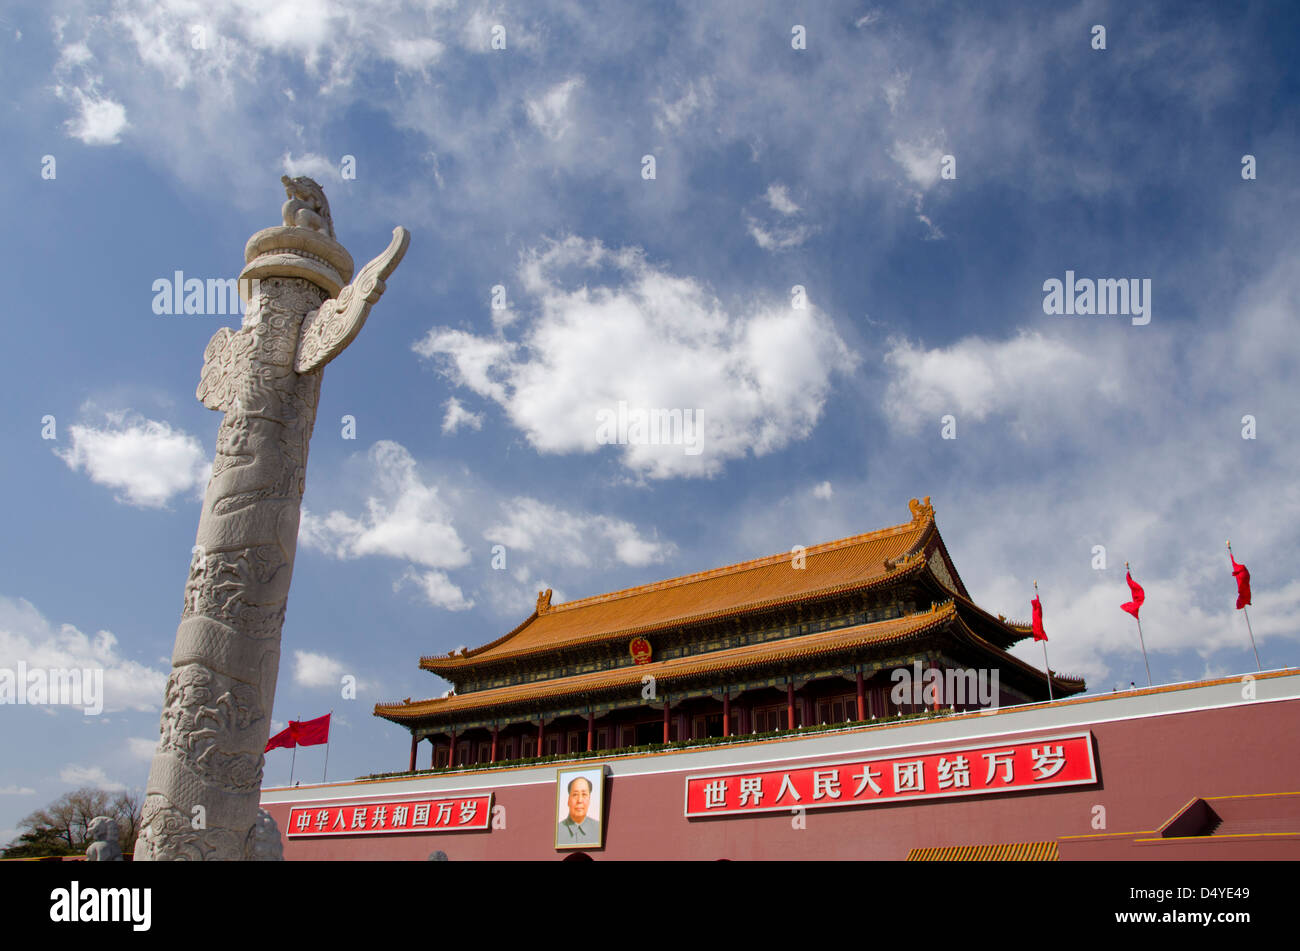 China, Beijing, Forbidden City. Highly carved pillar at the entrance of the Forbidden City at the Gate of Heavenly Peace. Stock Photo